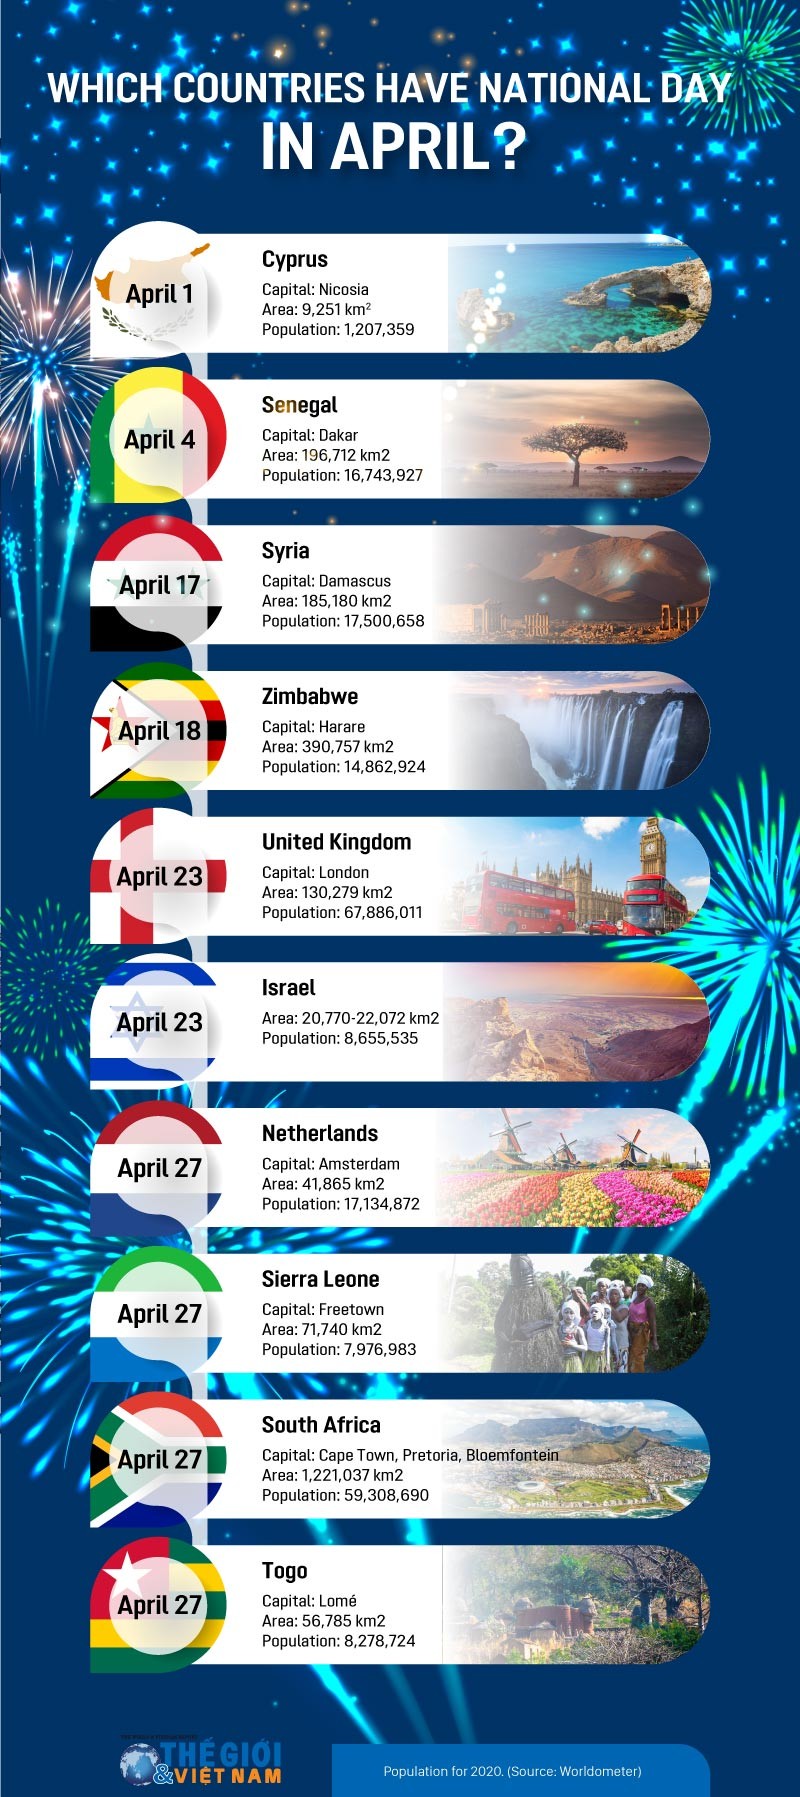 Which countries have National Day in April?